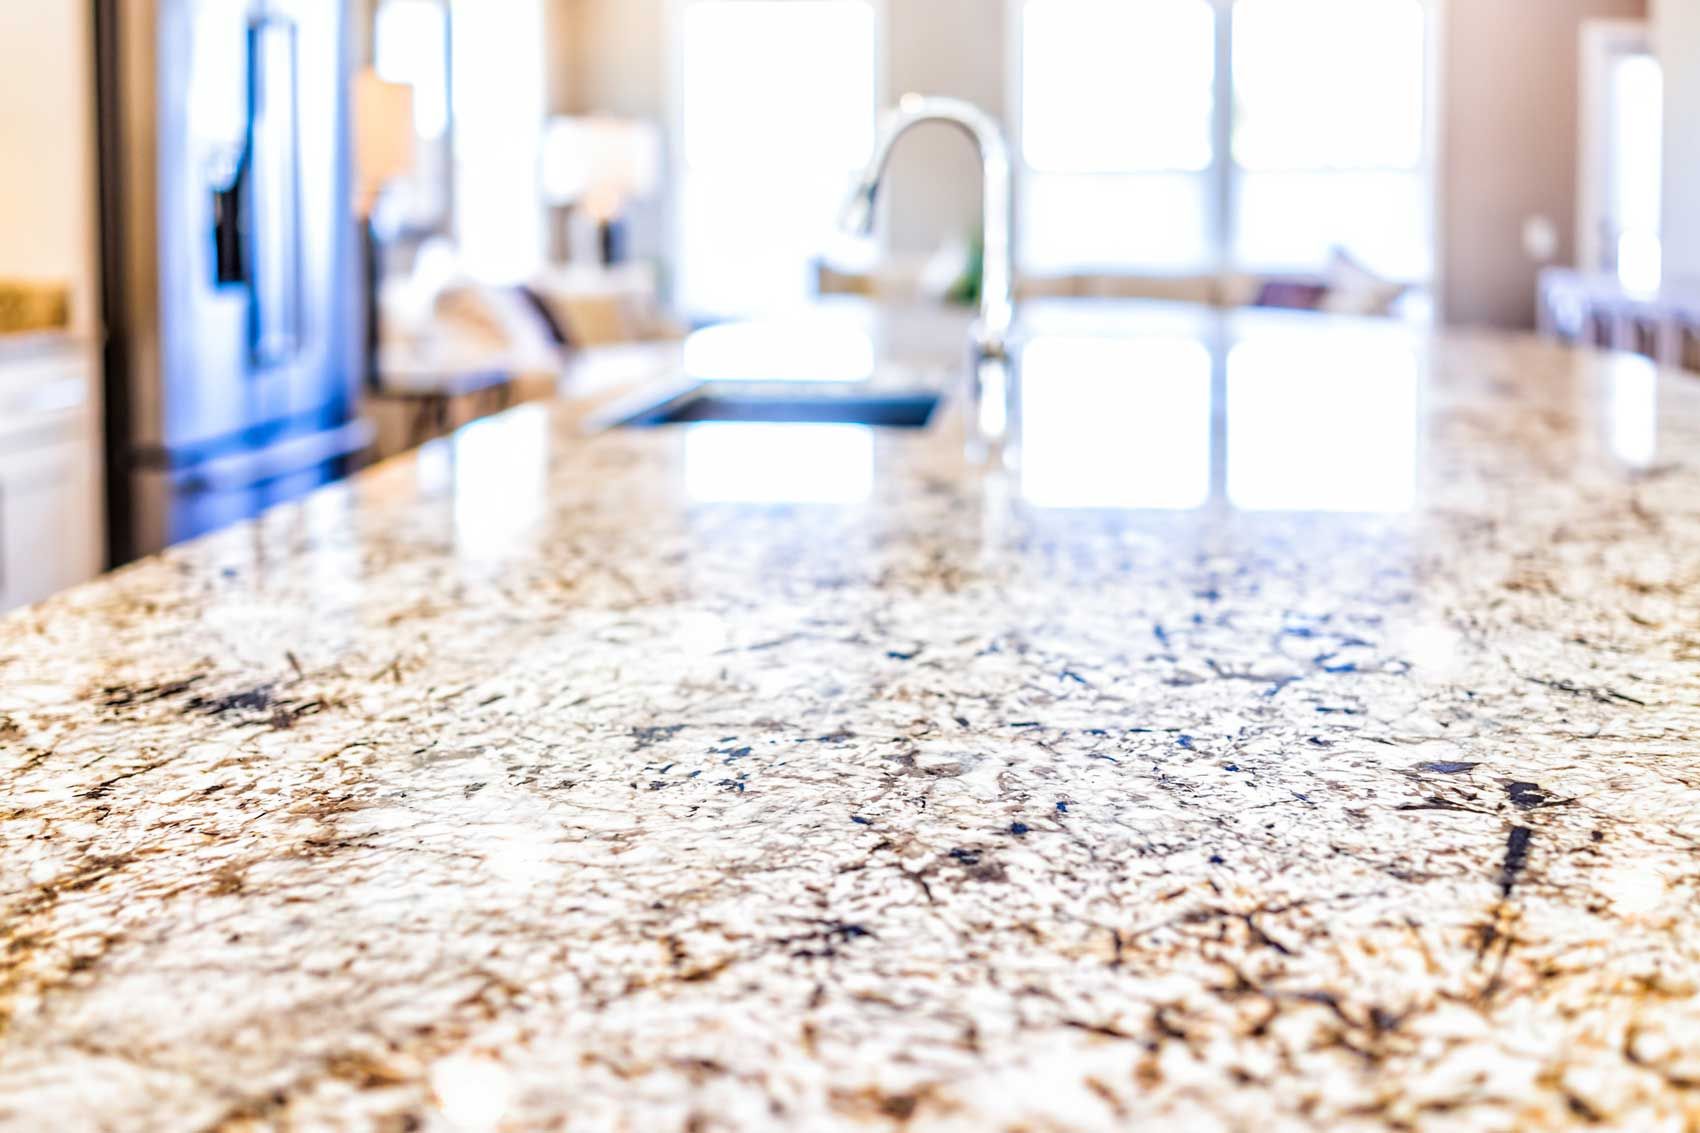 A close up of a granite counter top in a kitchen with a sink and refrigerator.